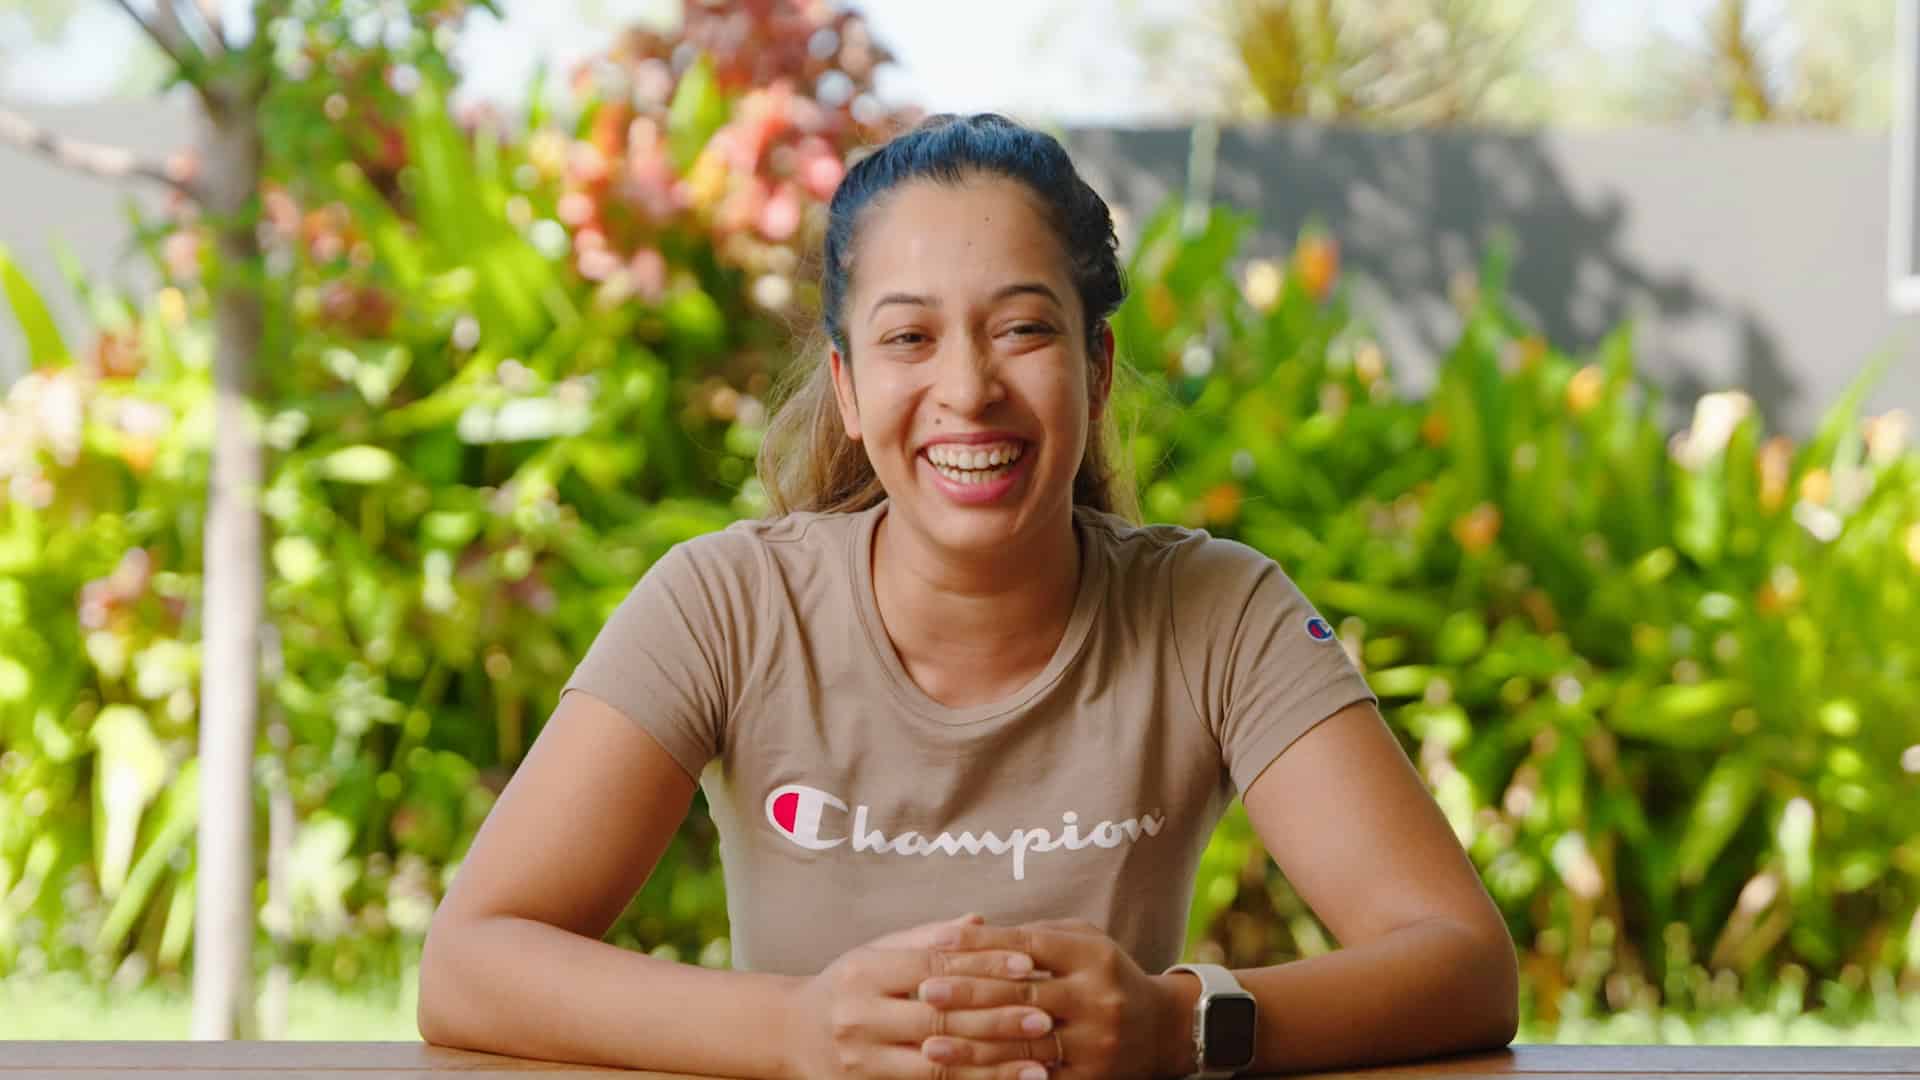 A young woman wearing a light brown t-shirt sits with her elbows on the table and smiles. Green shrubs are in the garden behind her.